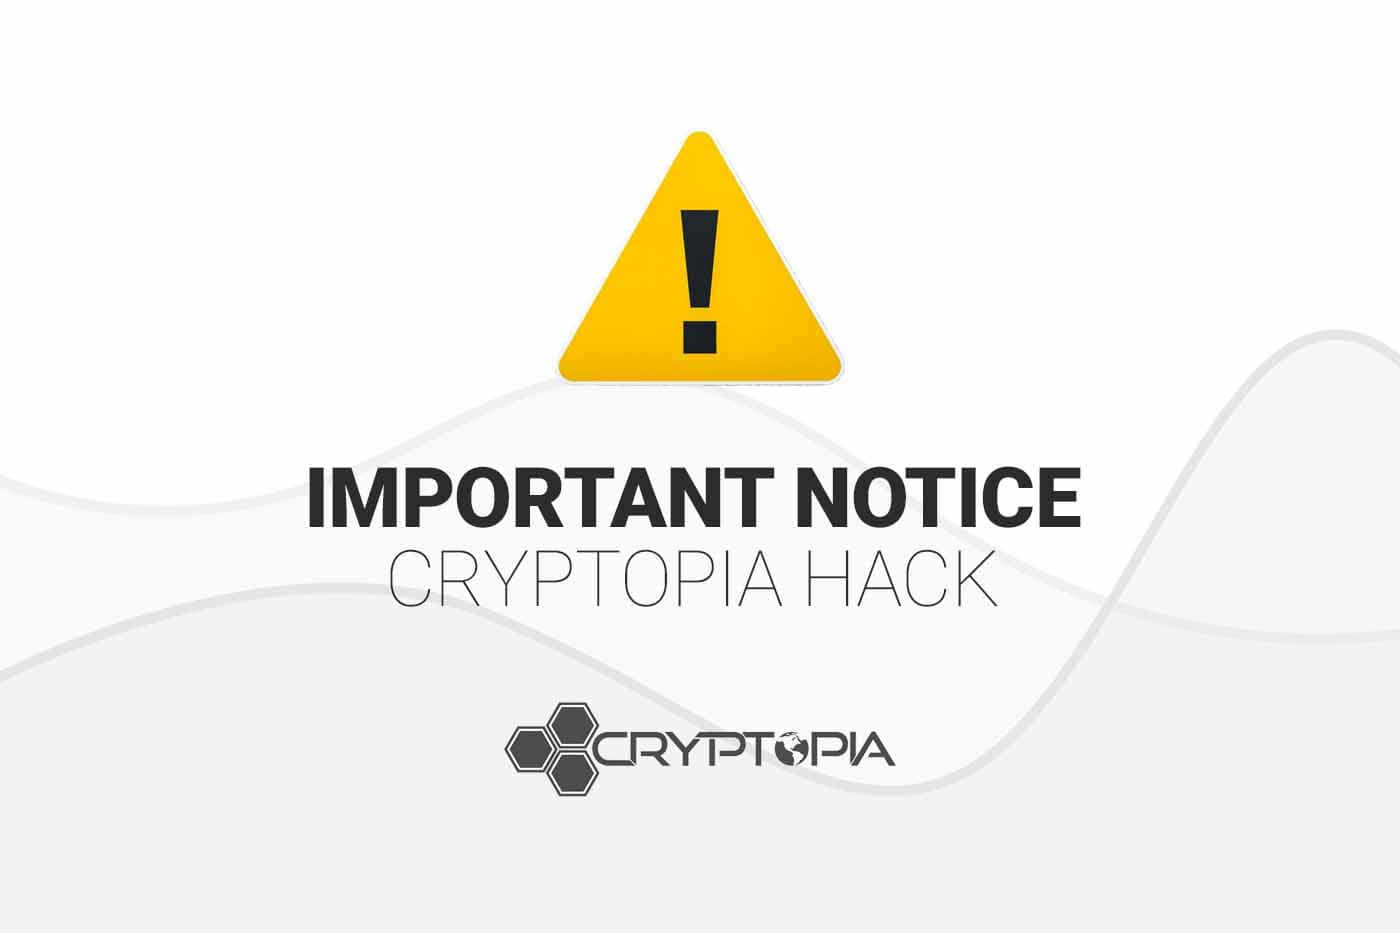 Article The important notice on Cryptopia hack situation